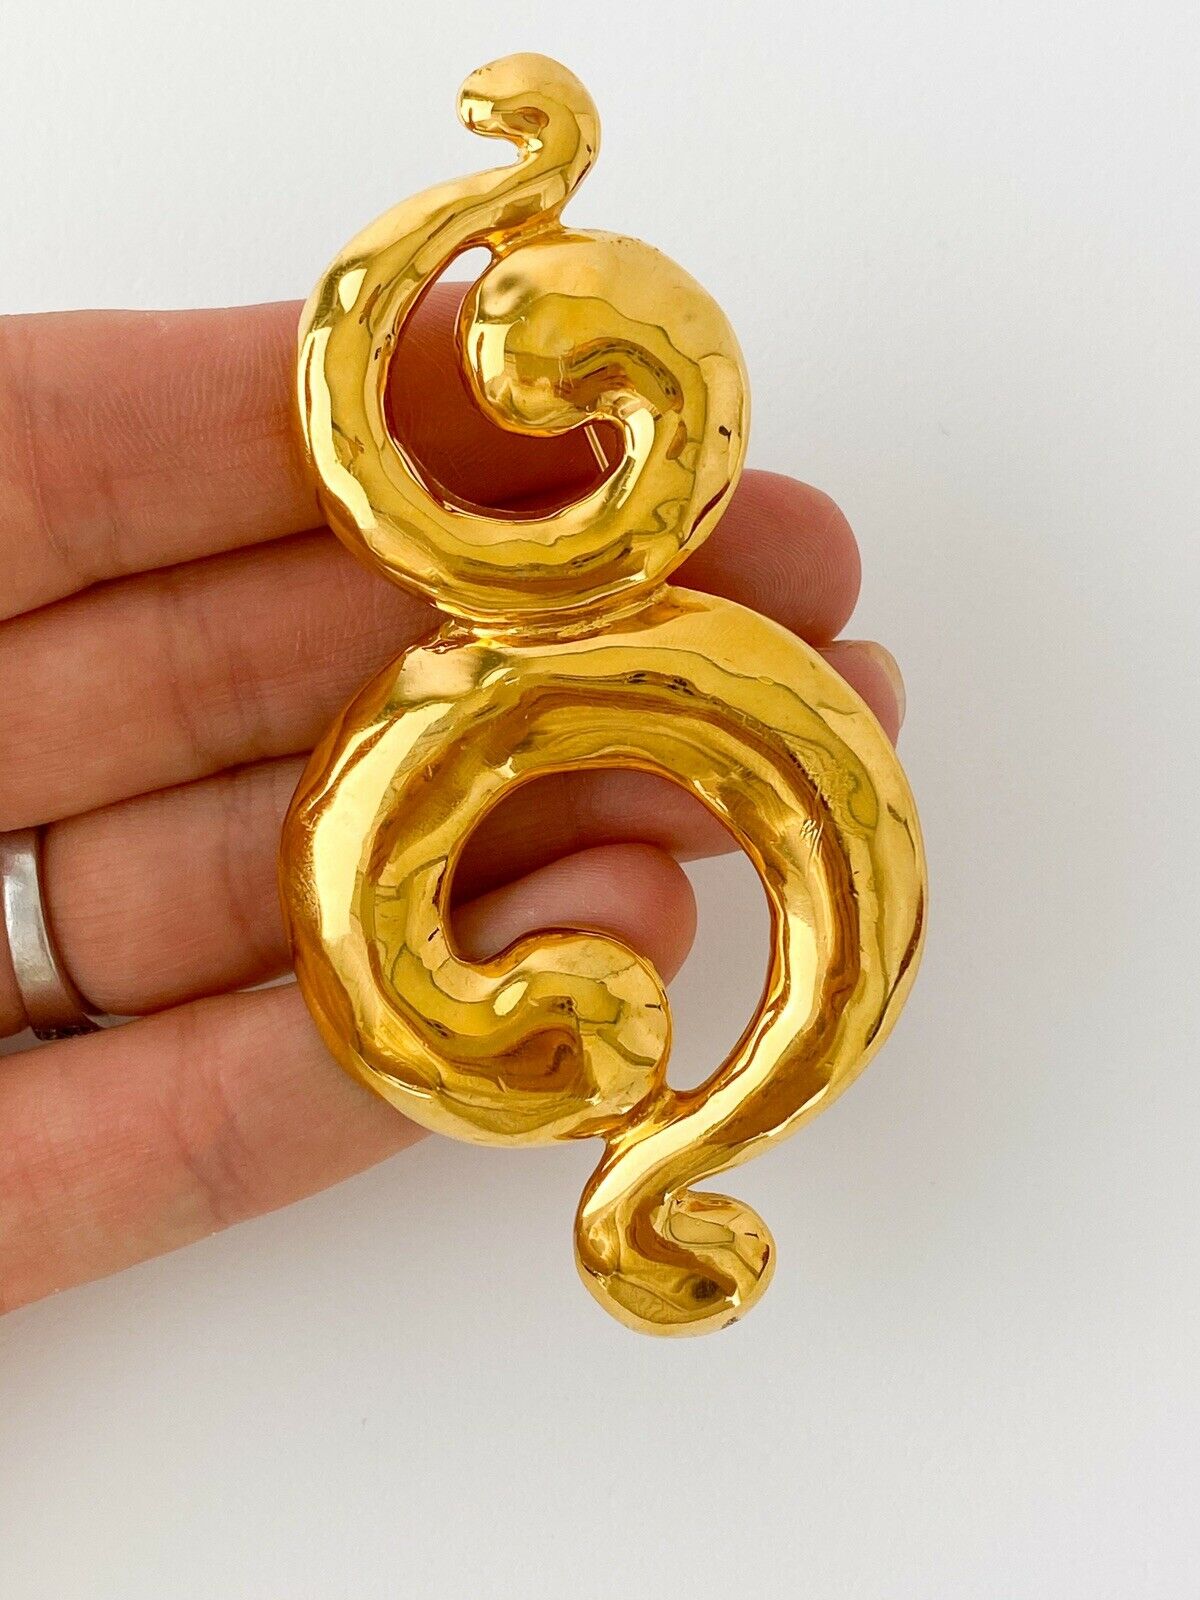 YSL Yves Saint Laurent Vintage Gold Tone Coiled Spiral Brooch Pin